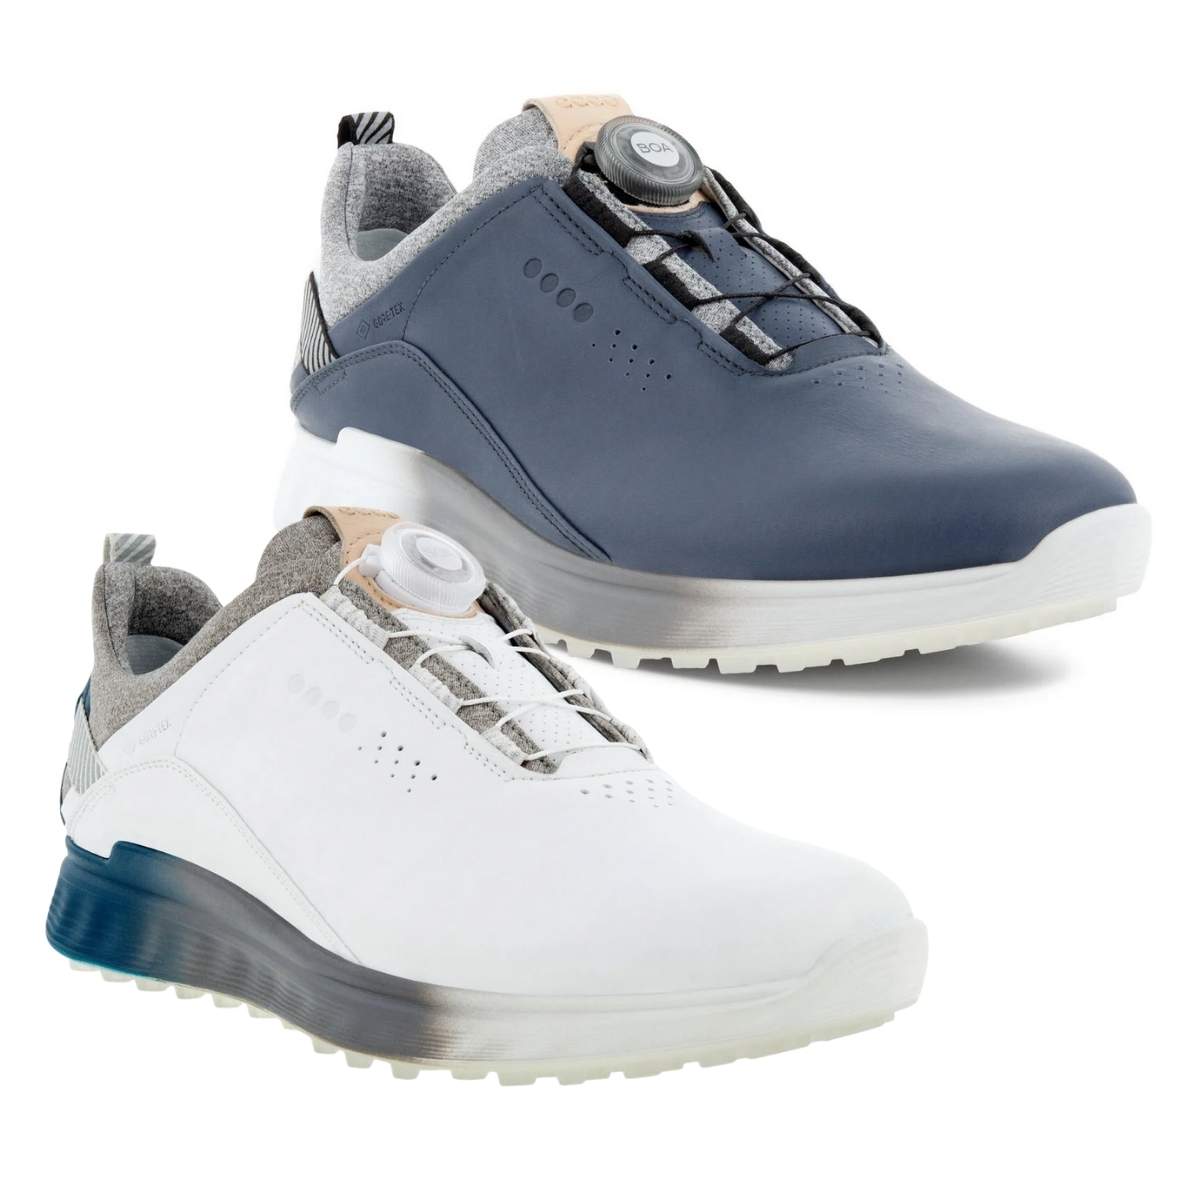 Buy > ecco golf shoes clearance canada > in stock